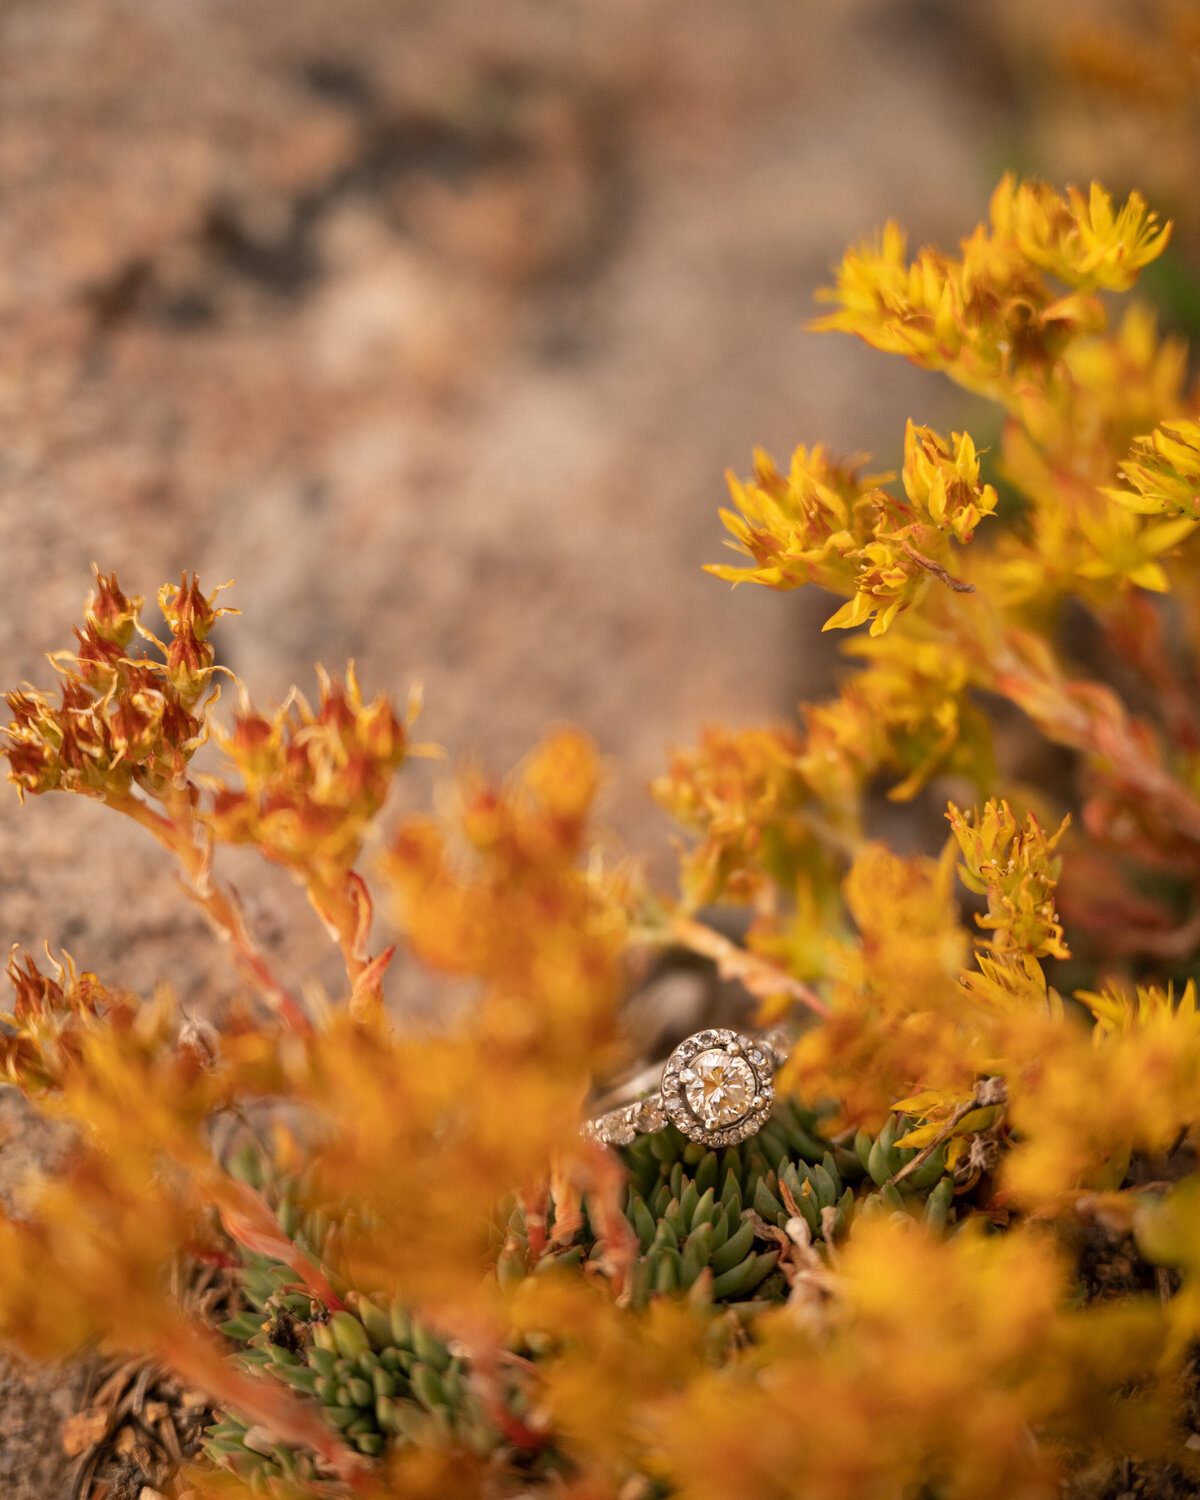 Engagement ring surrounded by yellow and orange wildflowers